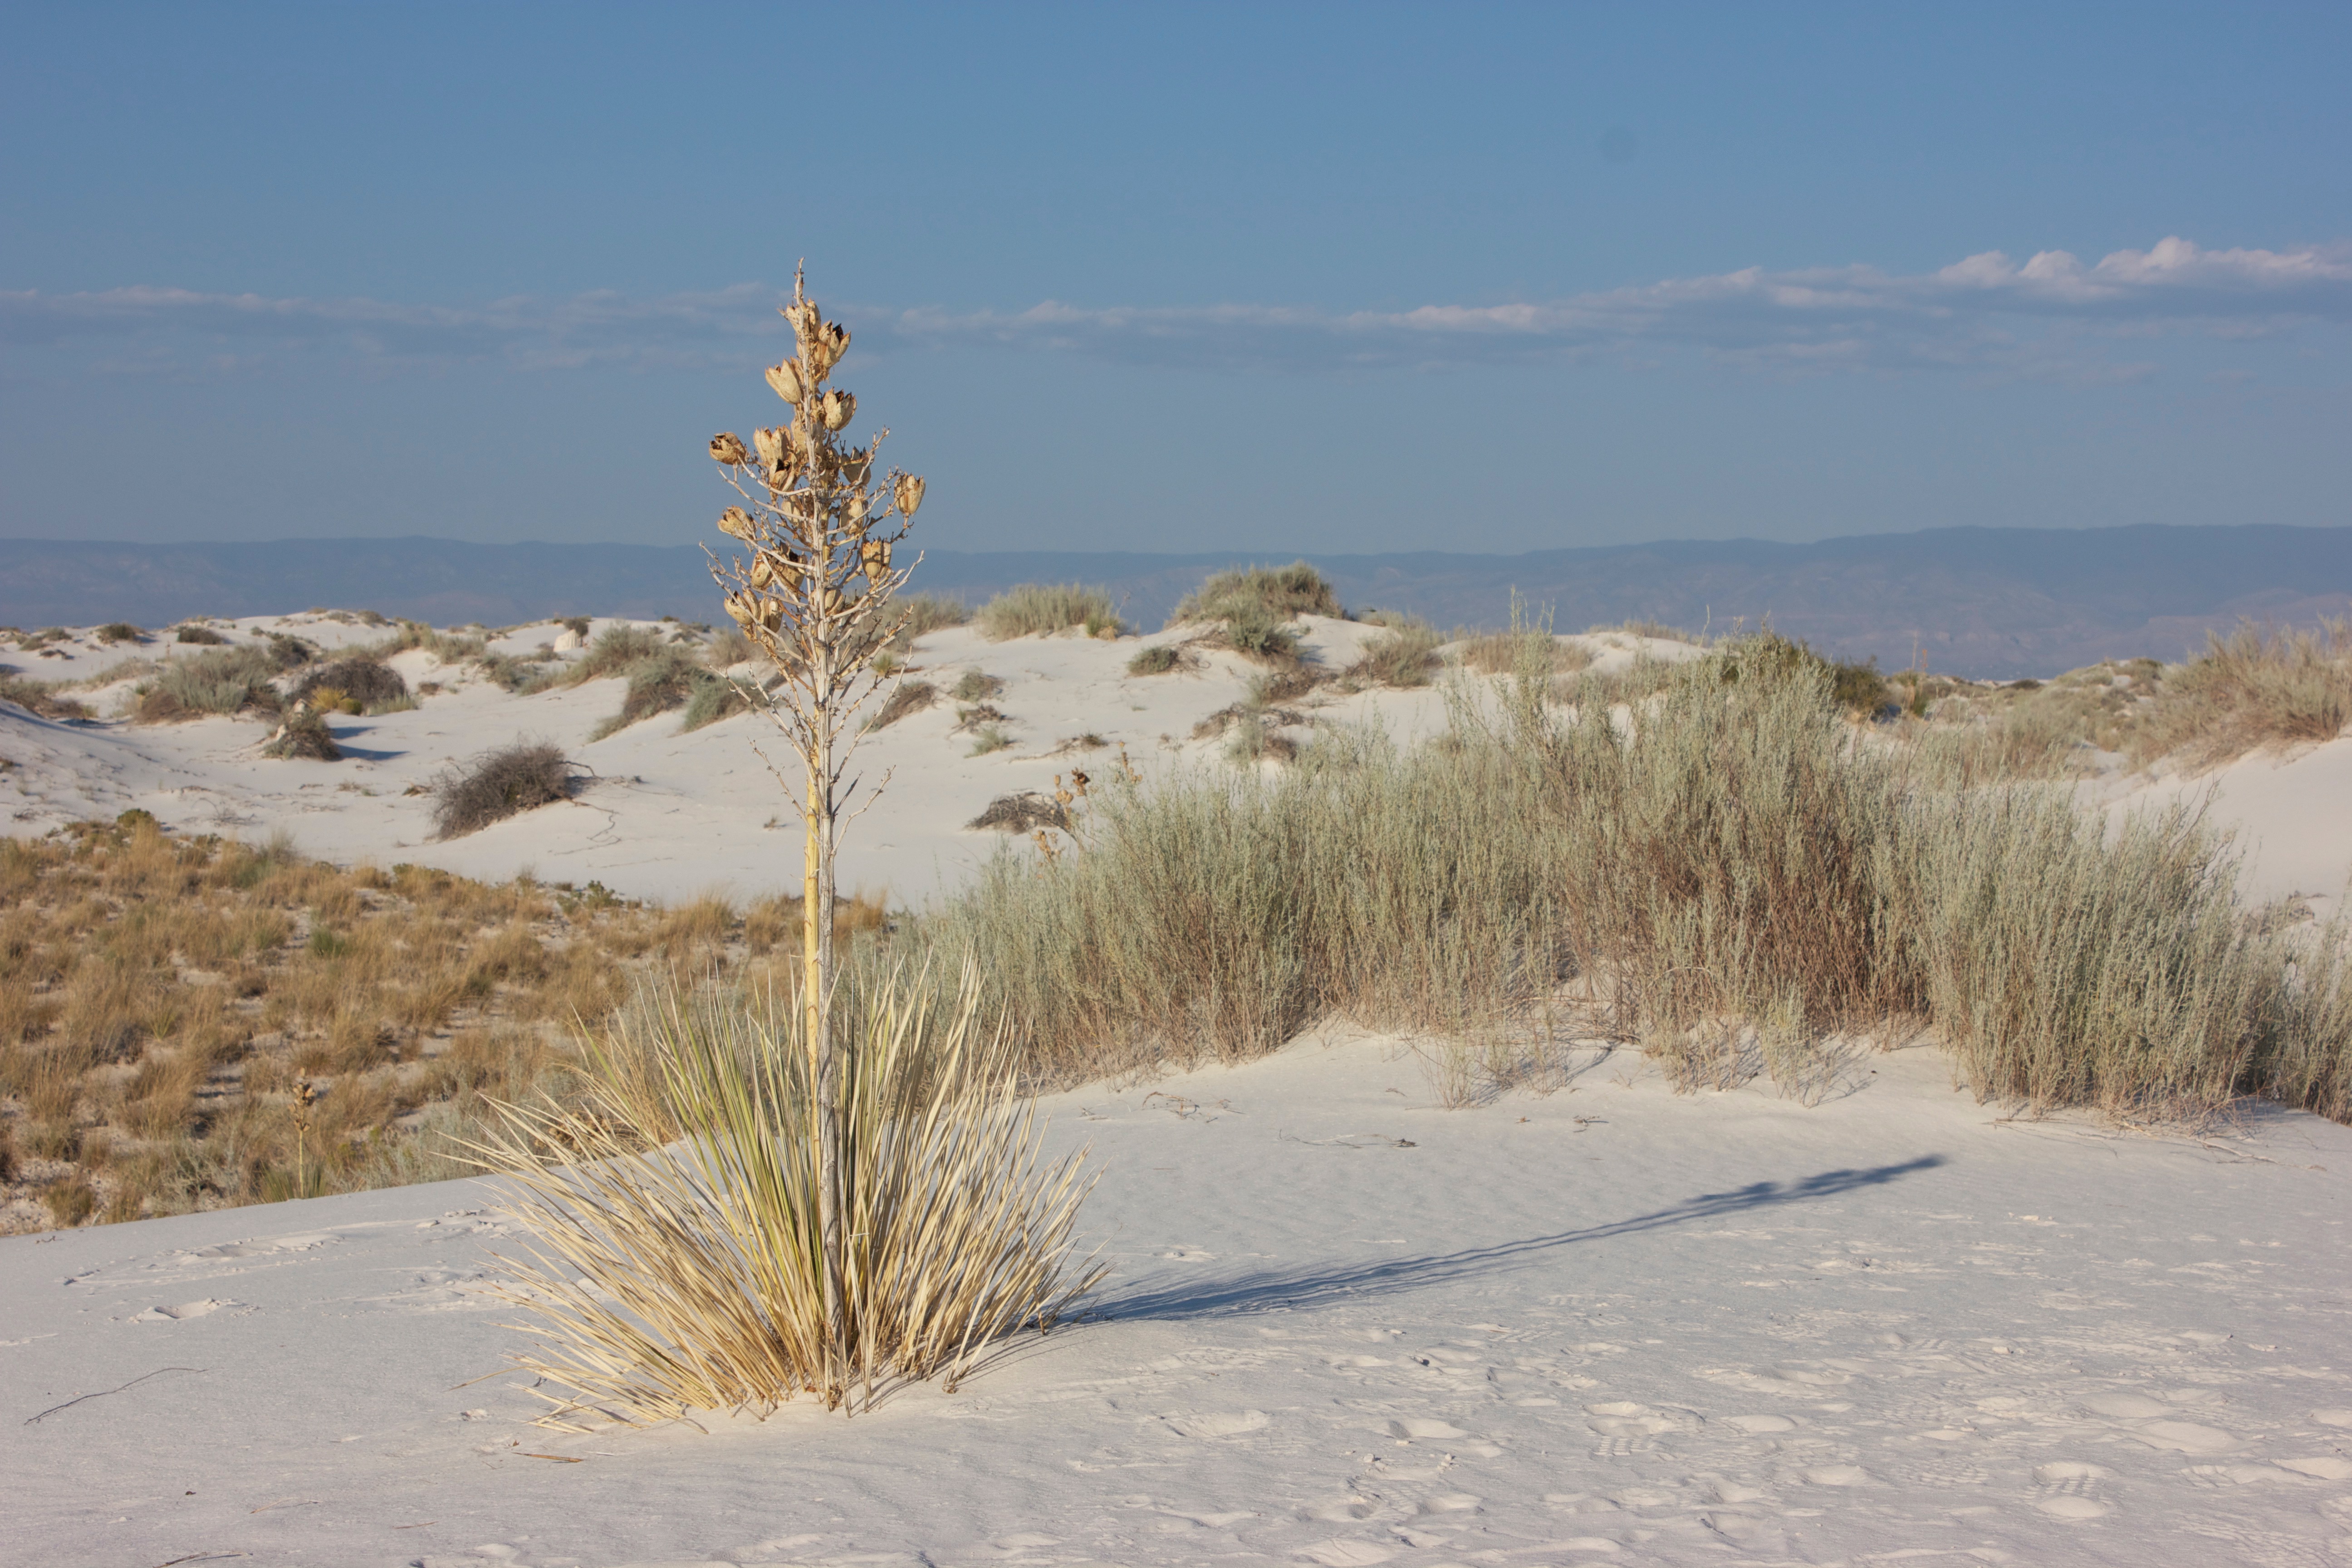 Soaptree yucca plant at White Sands National Monument, New Mexico.